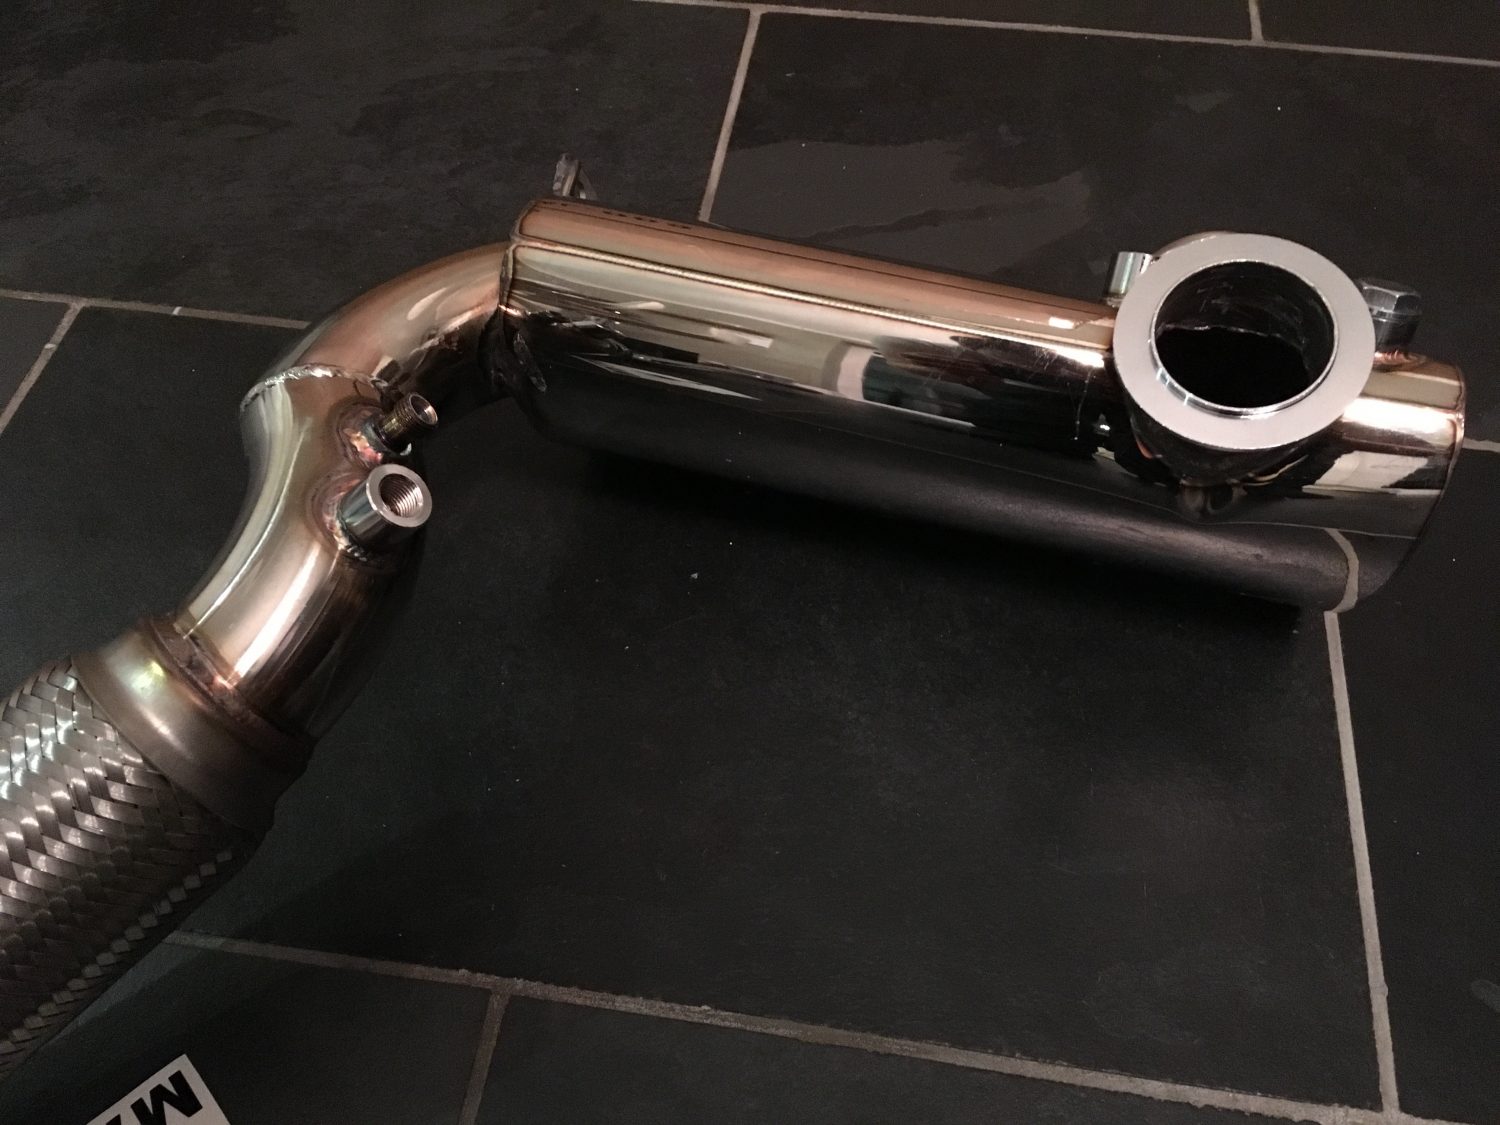 Skoda Octavia VRS 2.0 TDi DPF Removal Stainless Performance Exhaust Pipe